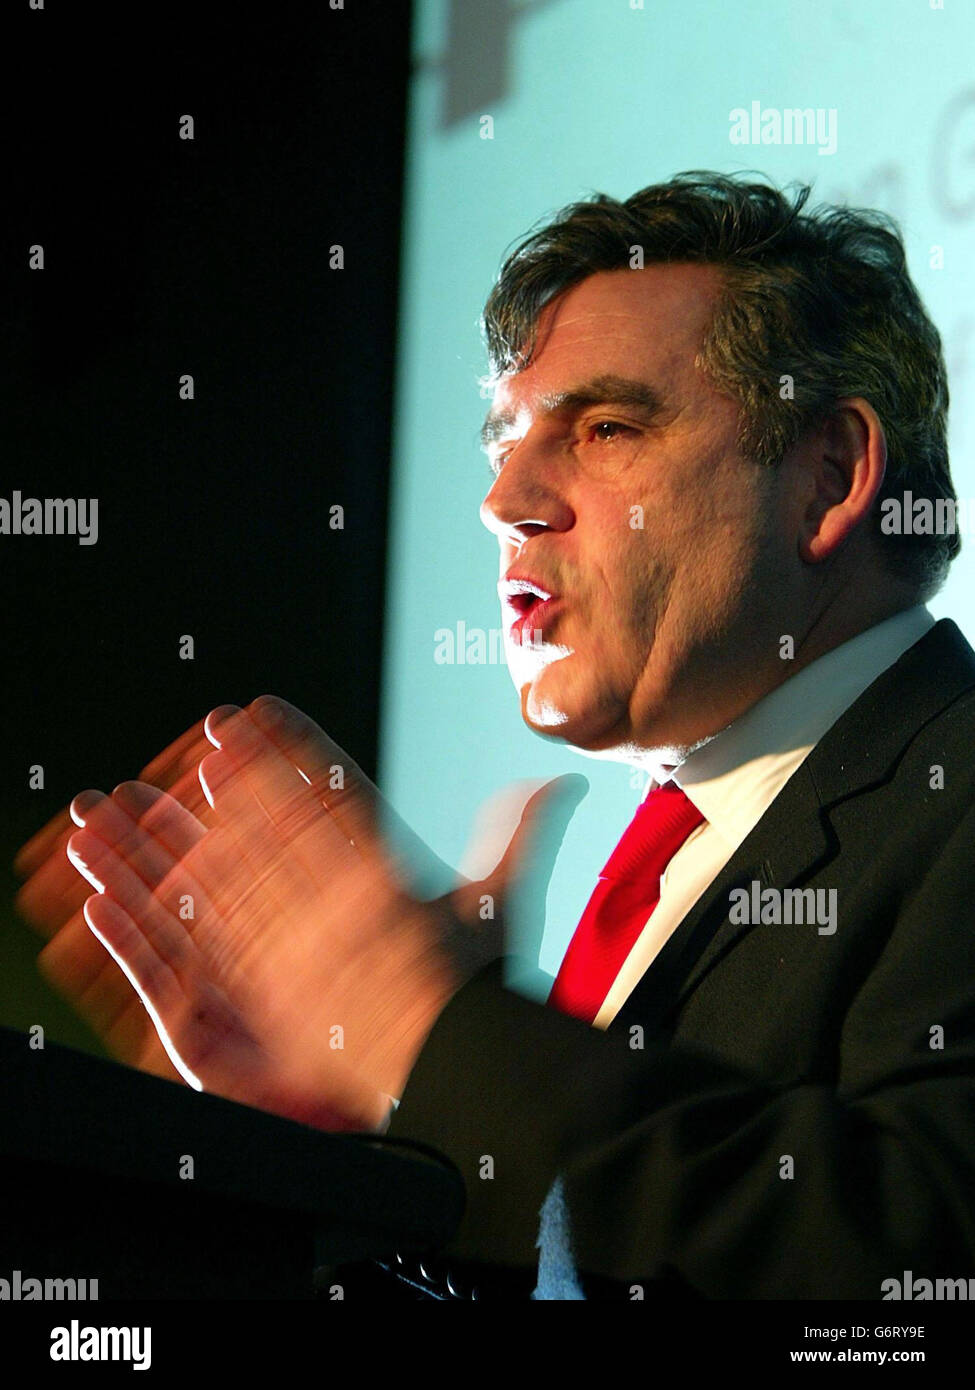 Britain's Chancellor of the Exchequer Gordon Brown makes a keynote speech at the Making Globalisation Work For All conference in London. Mr Brown made a passionate appeal on behalf of people living on the 'knife's edge' of existence as he outlined his plans to double the amount of development aid the world's richest countries give to the poorest. Stock Photo